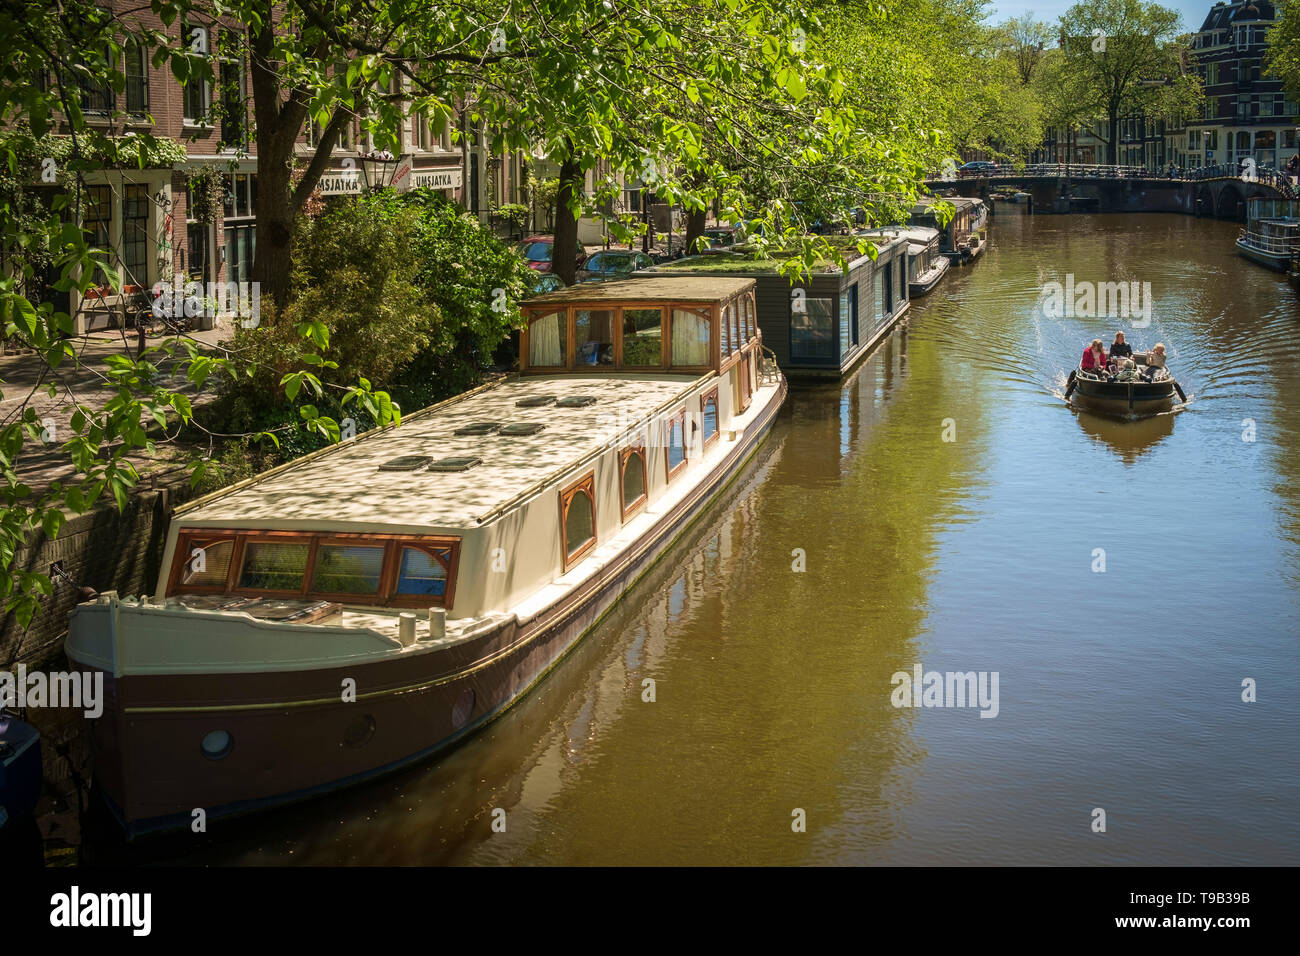 Houseboats and a pleasure boat on a sunny Amsterdam canal. Stock Photo